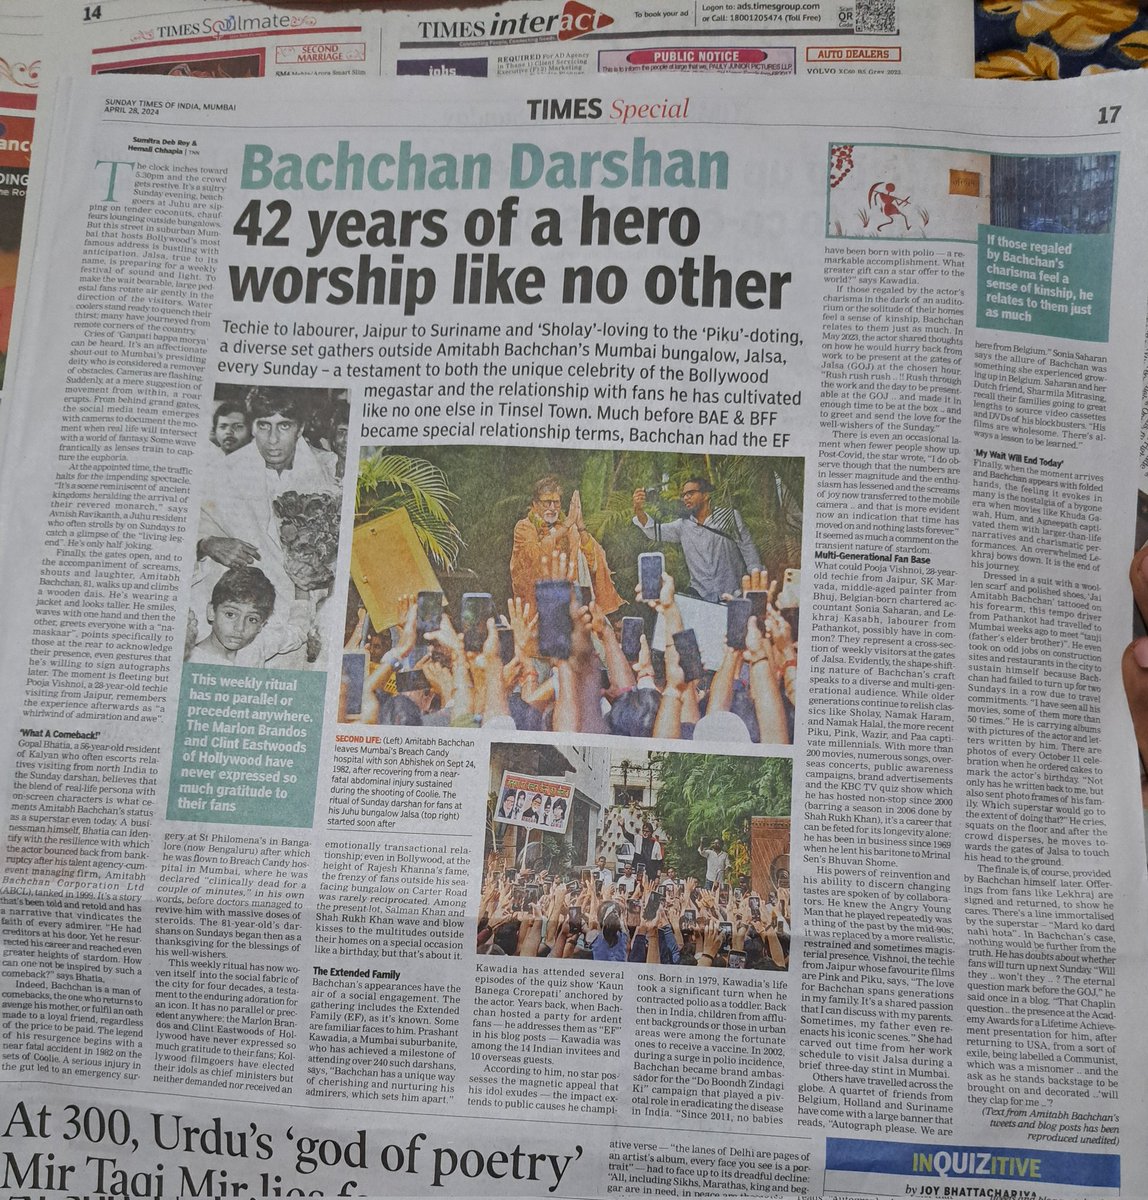 Bachchan Darshan Whether fans will turn up next Sunday... Will they...won't they....? What could be a more beautiful start to a Sunday than this? Do read this wonderful article of @SumitraDebRoy & @hChhapiaTOI @SrBachchan #AmitabhBachchan